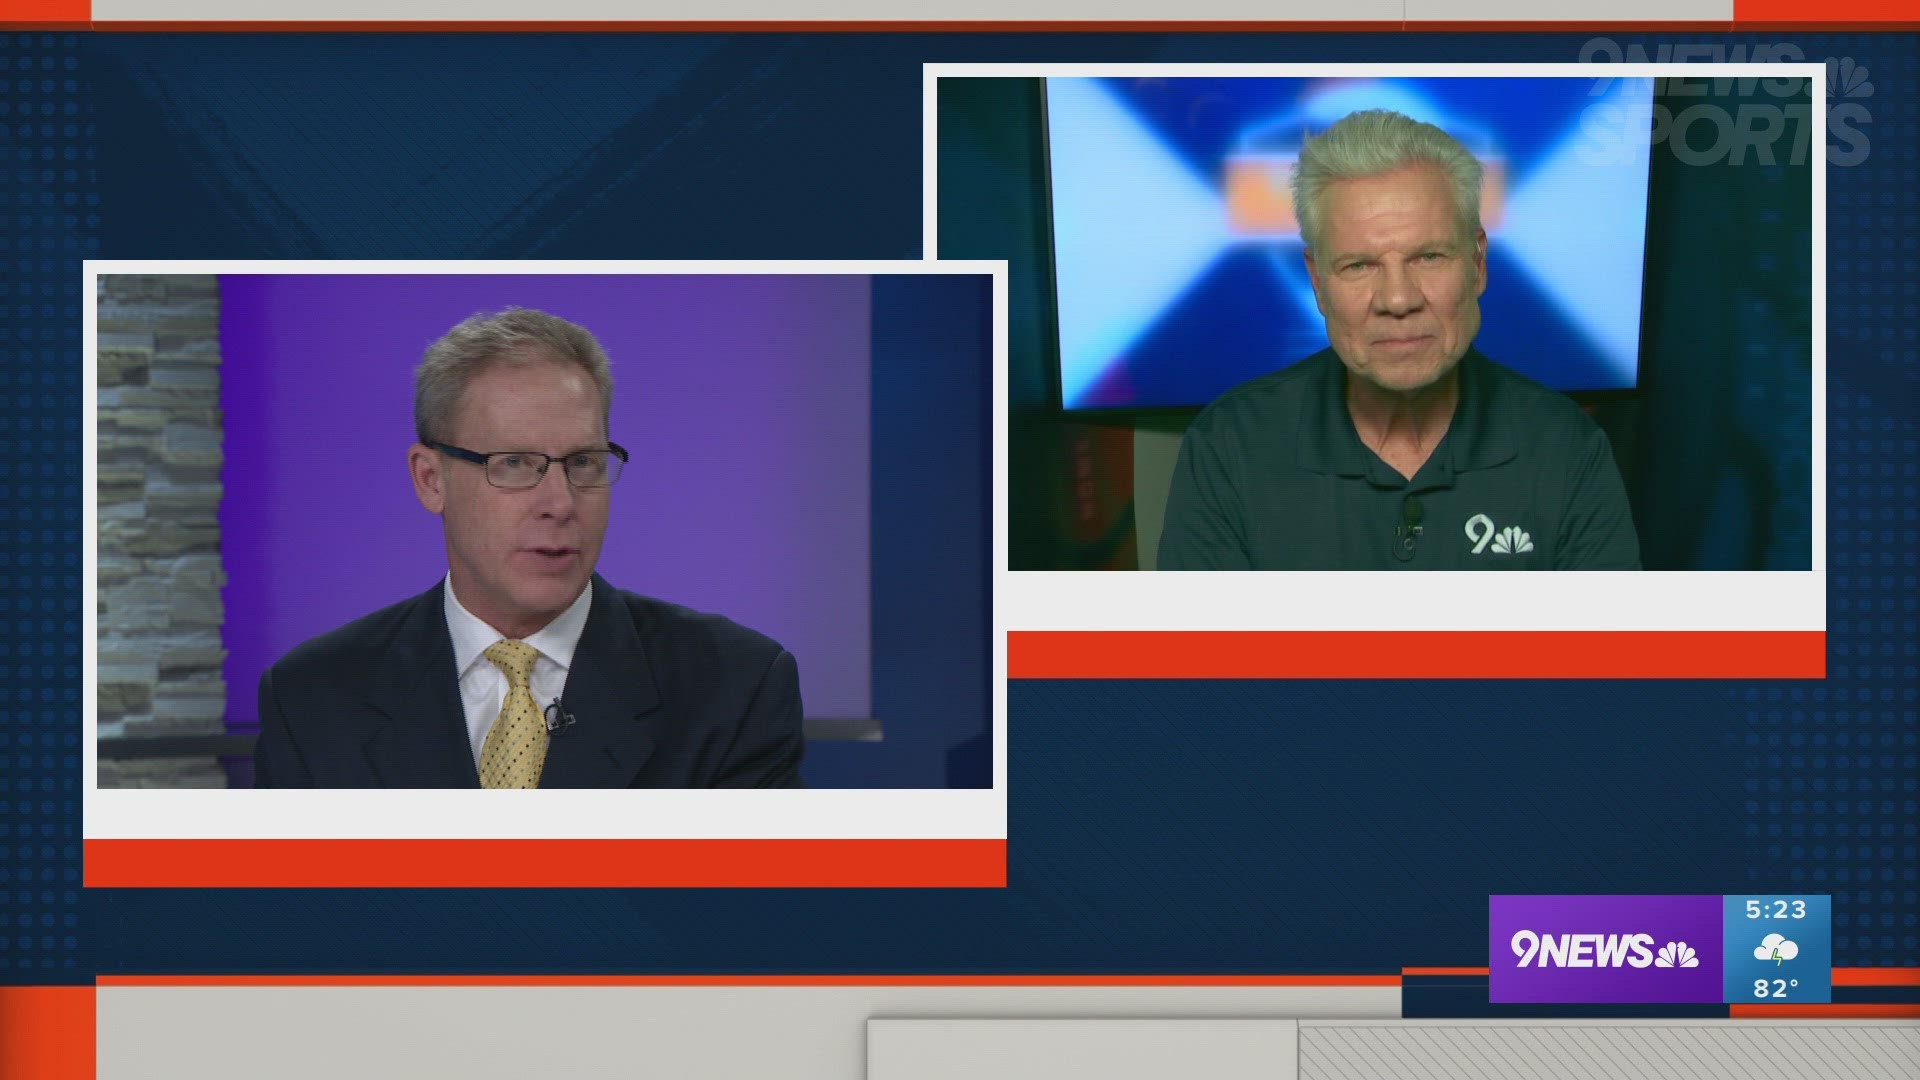 Mike Klis joined Rod Mackey live on 9NEWS to discuss the latest on the Denver Broncos on Friday, July 28, 2023.